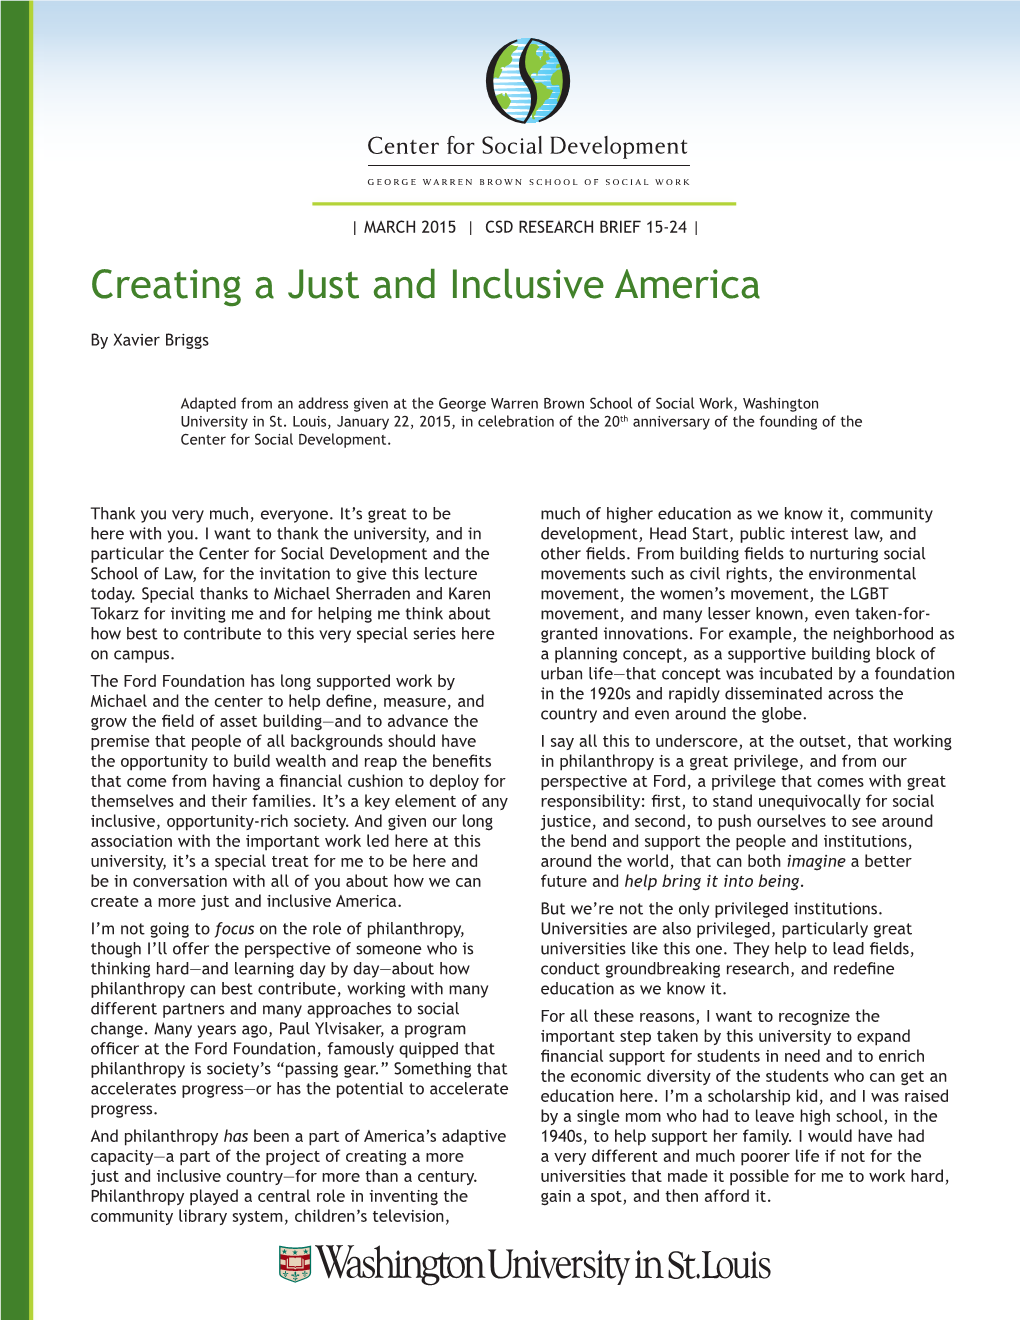 Creating a Just and Inclusive America